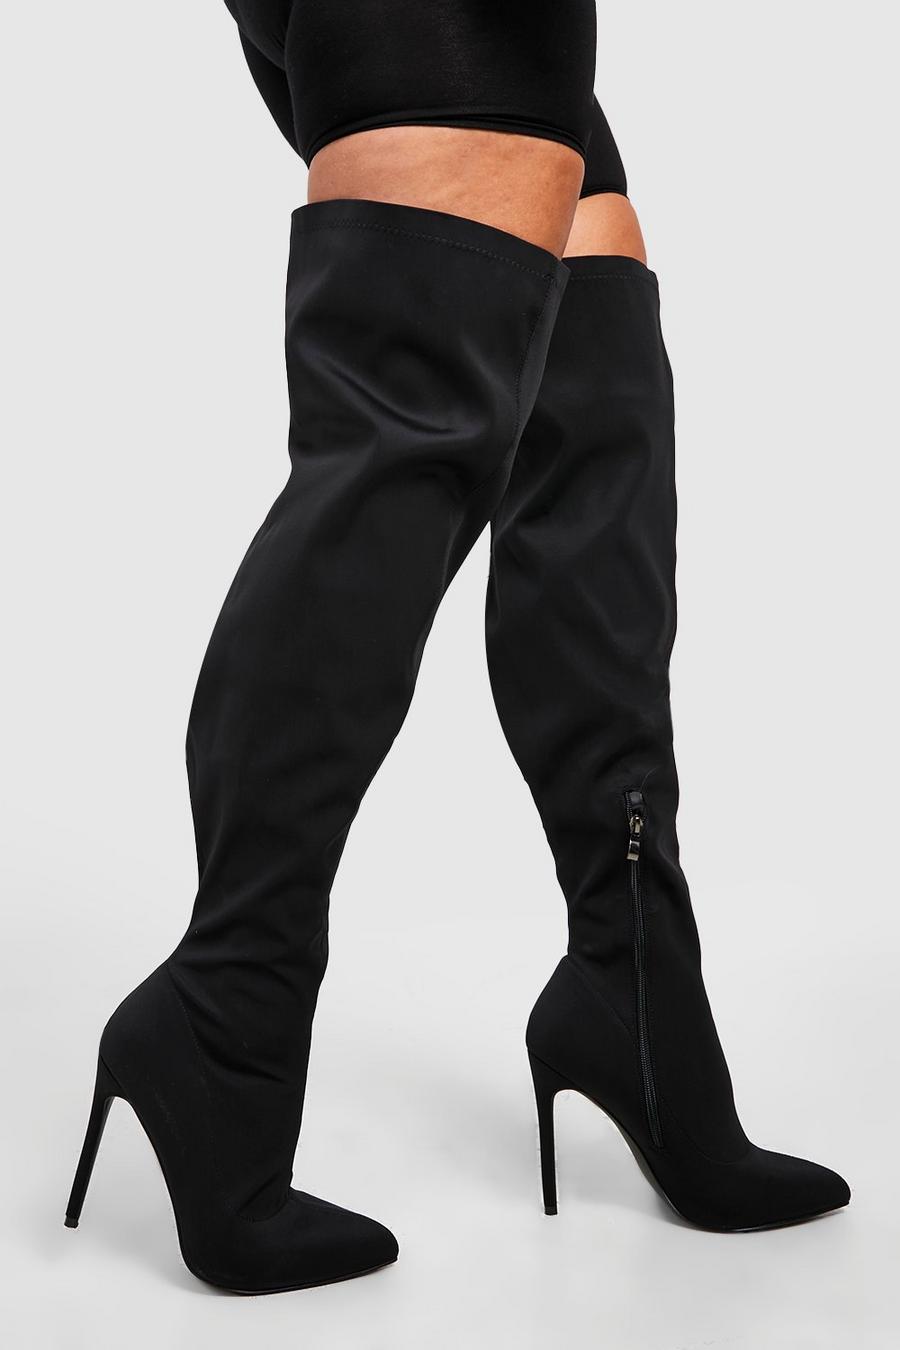 filter Final Mayor Wide Calf Over The Knee Stiletto Boots | boohoo